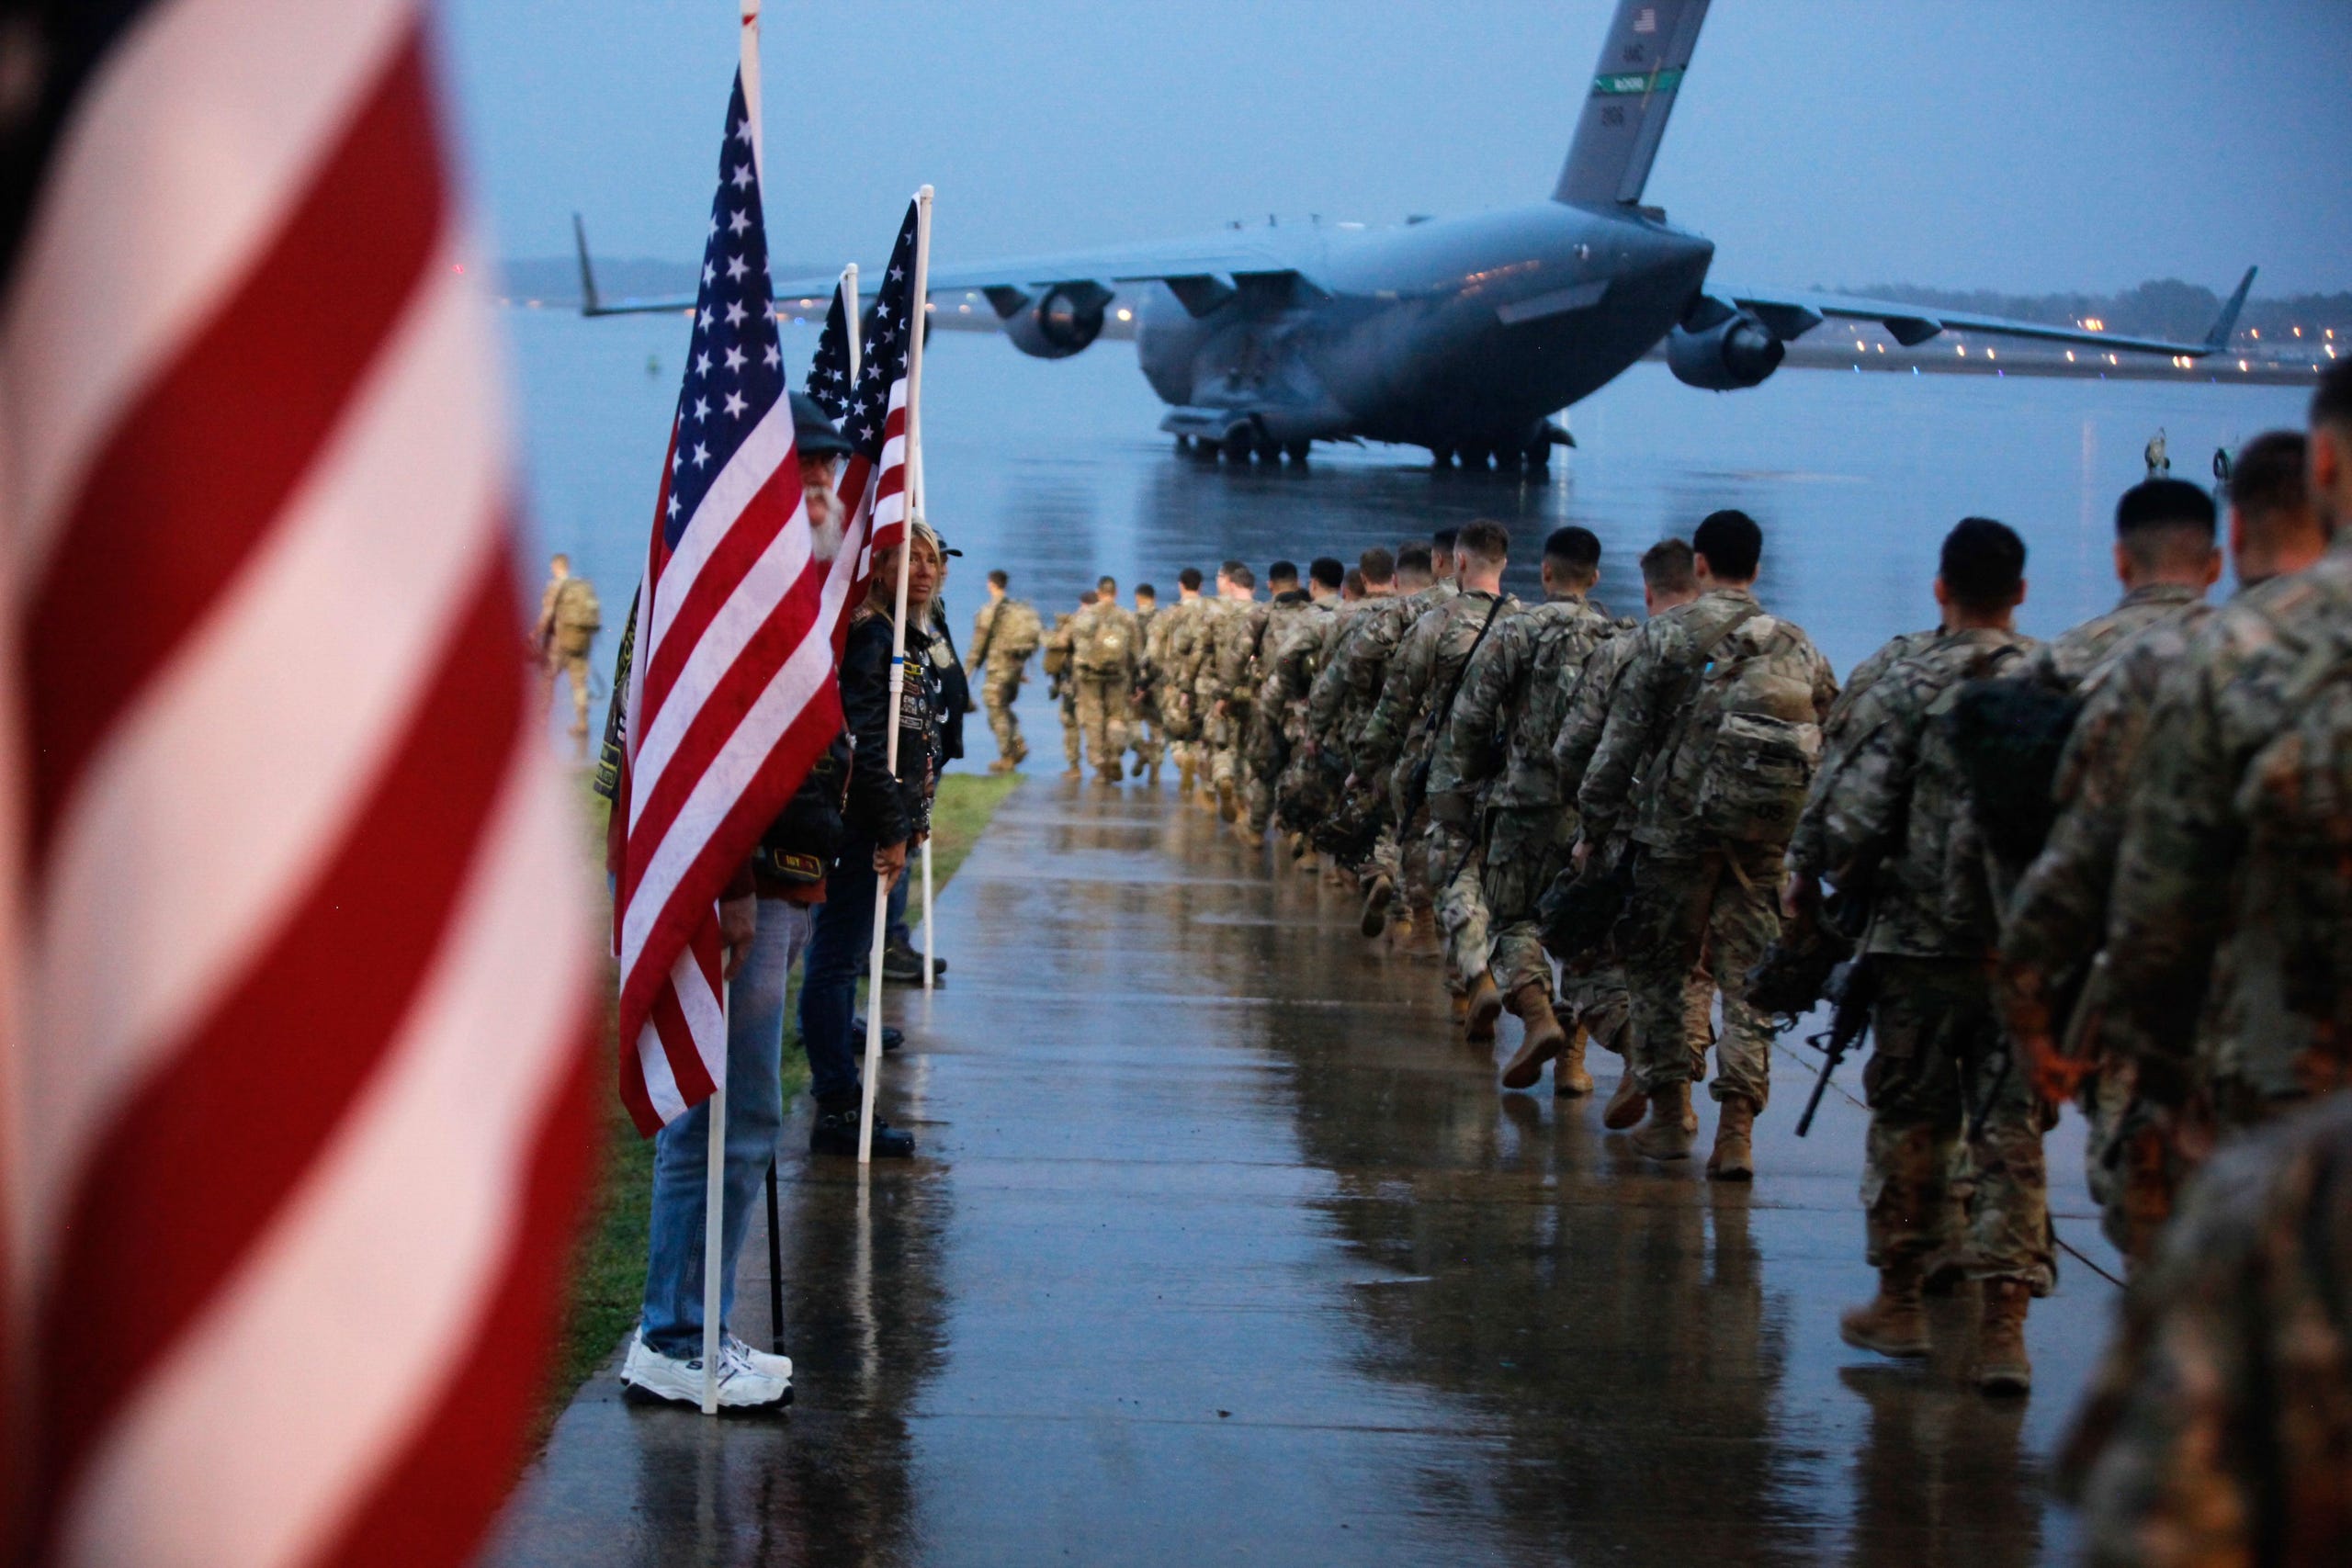 82nd Airborne paratroopers march to board a civilian aircraft bound for the US Central Command area.